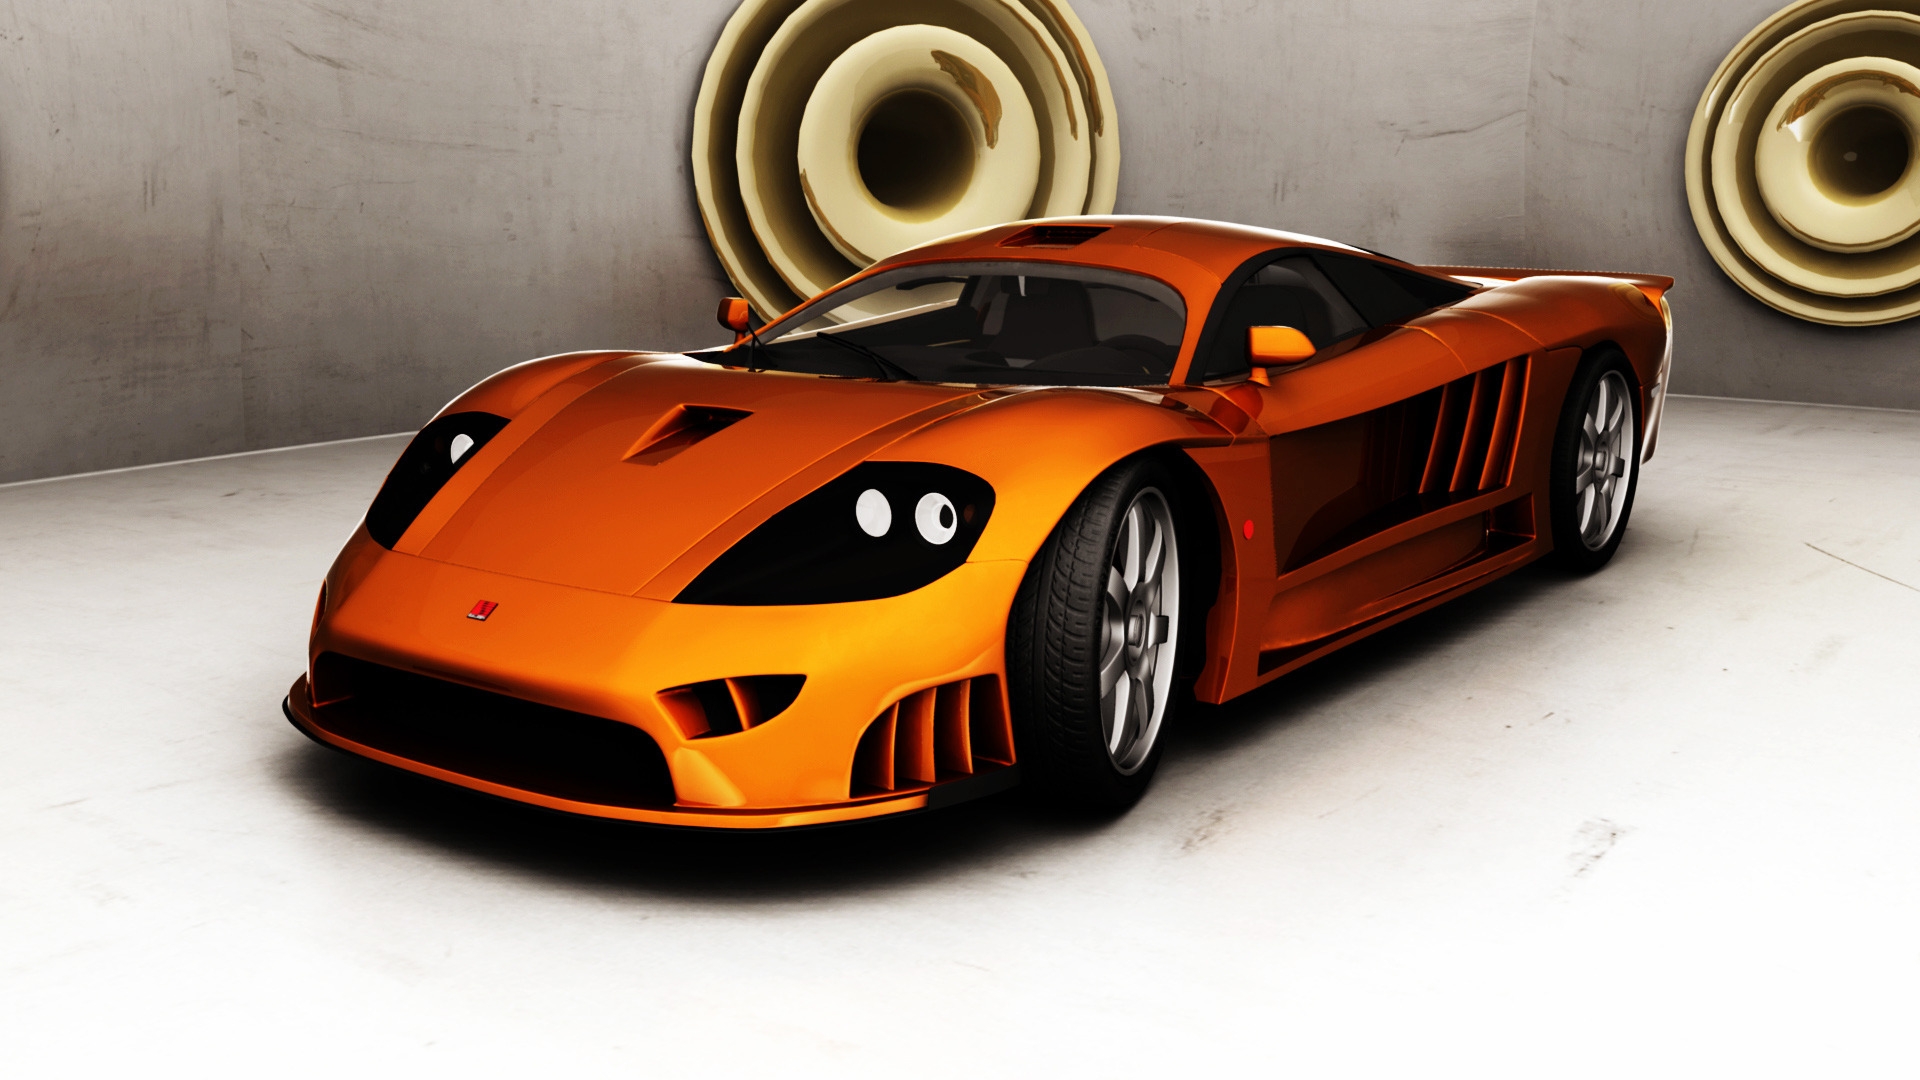 Saleen S7 Front for 1920 x 1080 HDTV 1080p resolution